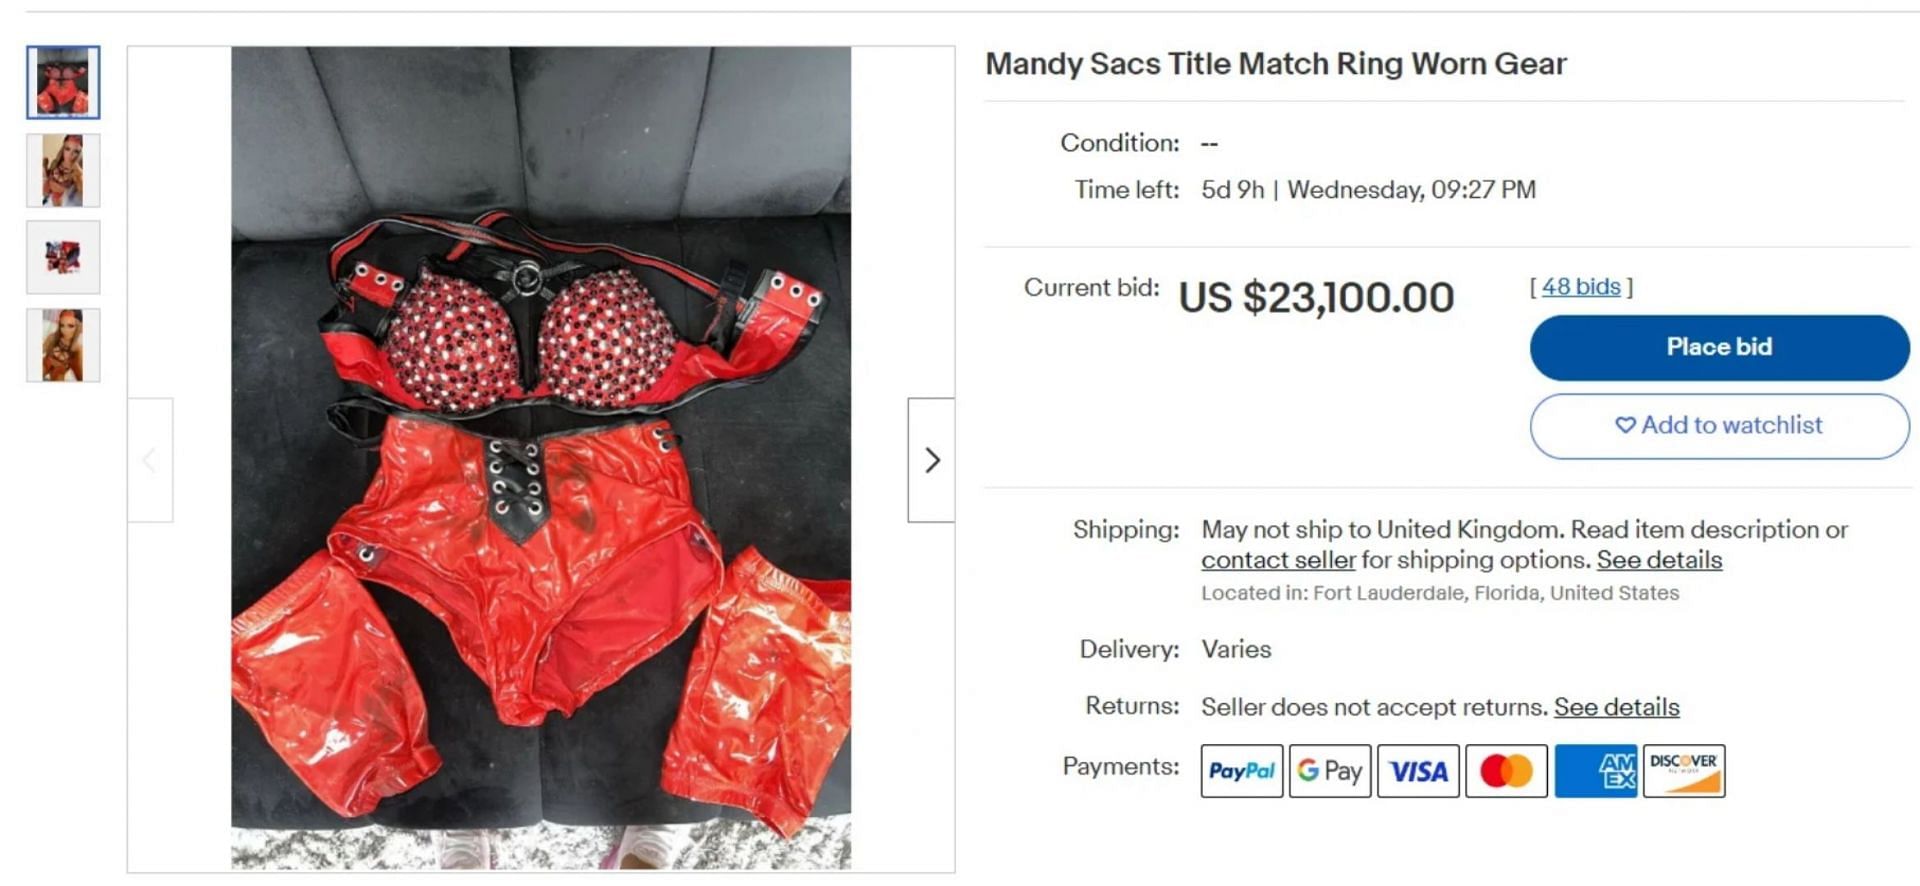 The former NXT Women&#039;s Champion&#039;s ring gear has received many high bids.